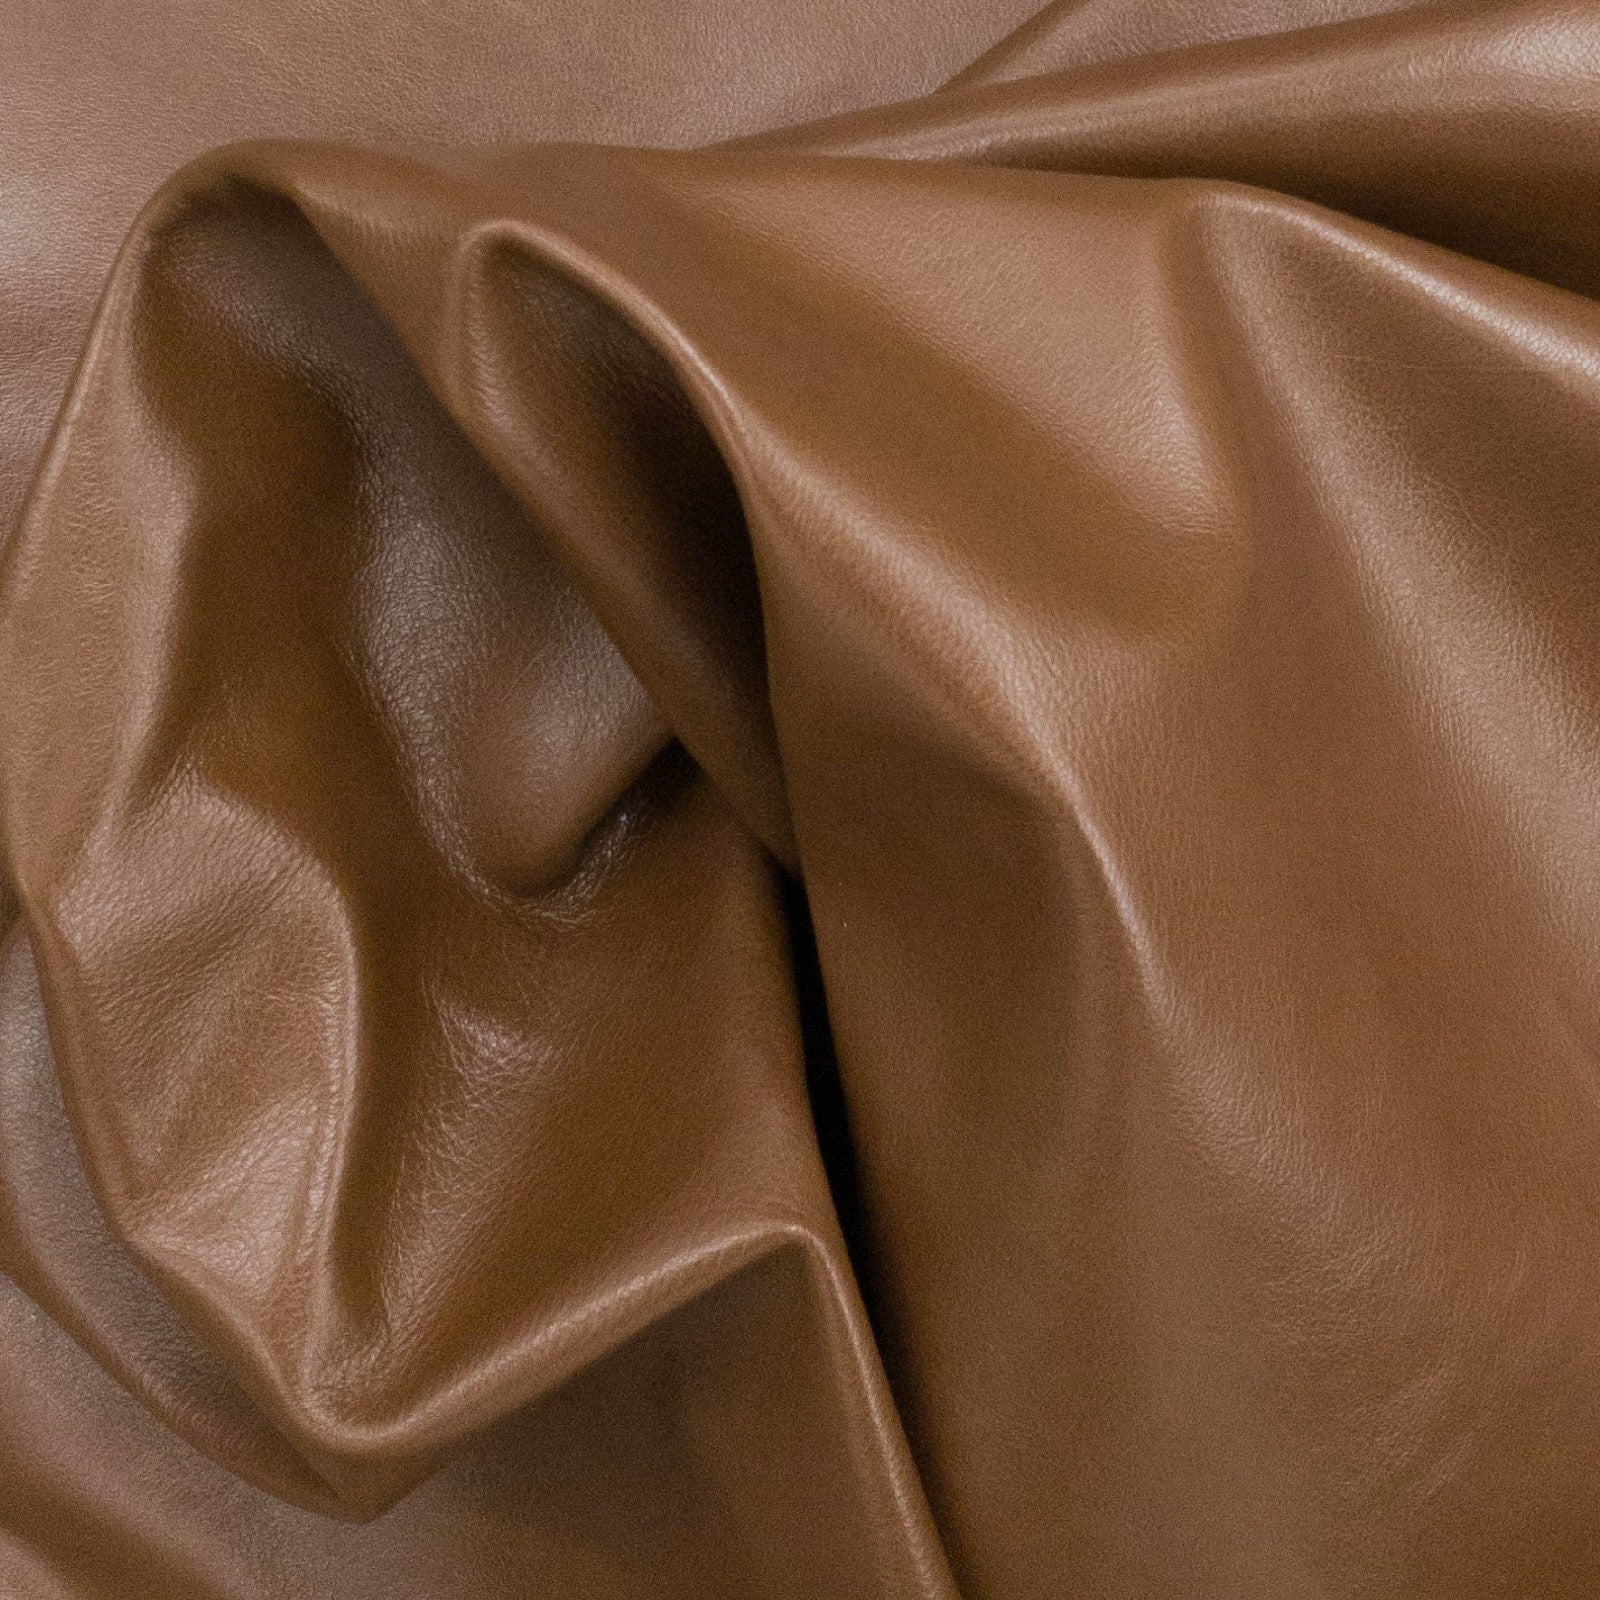 Dark Brown, 2-3 oz, 33-64 SqFt, Full Upholstery Cow Hides, Sweet Coco Brown / 49-56 / 2-3 oz | The Leather Guy